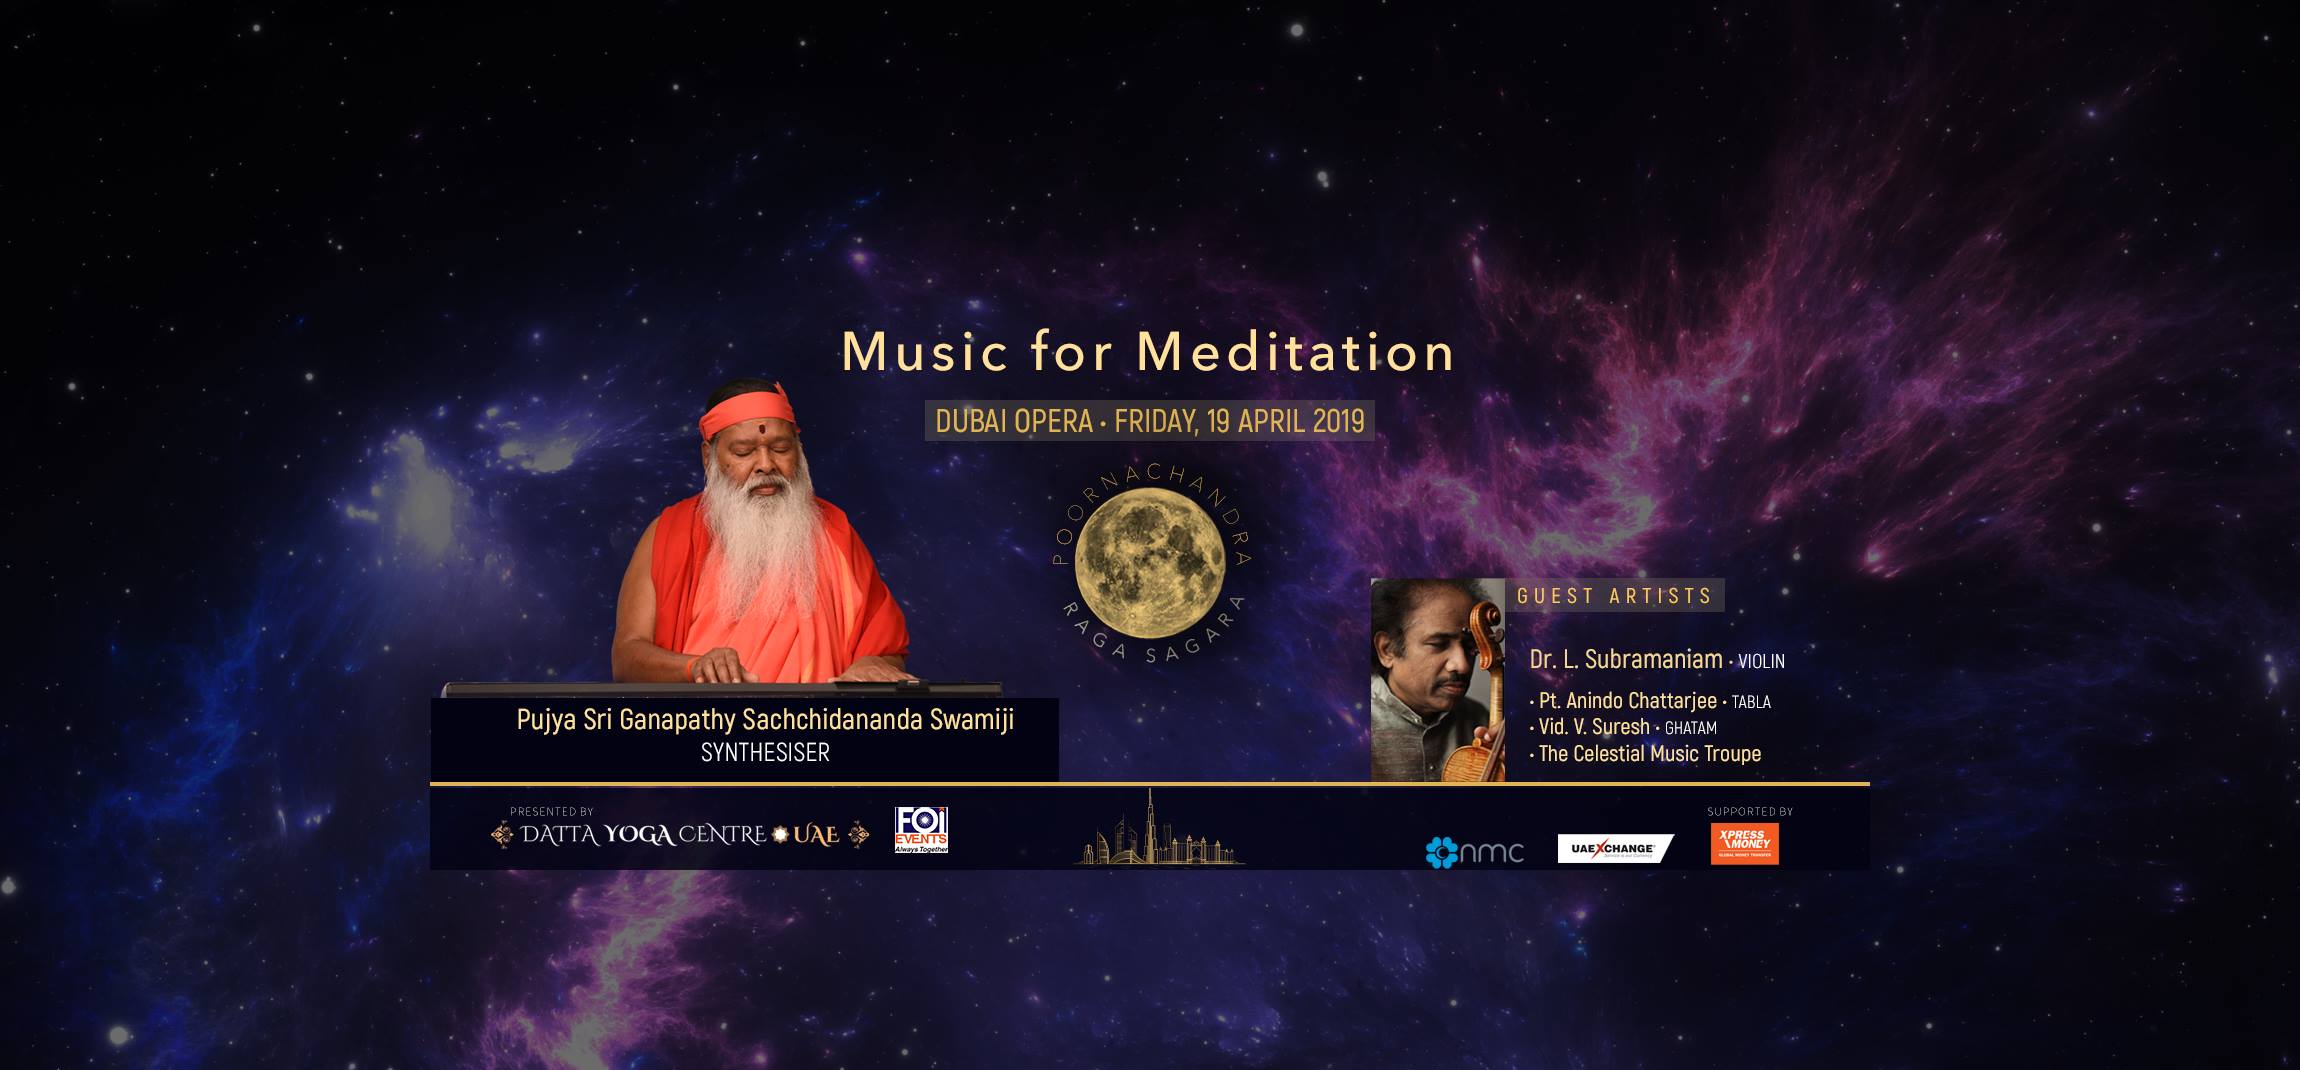 Music for Meditation at the Dubai Opera - Coming Soon in UAE